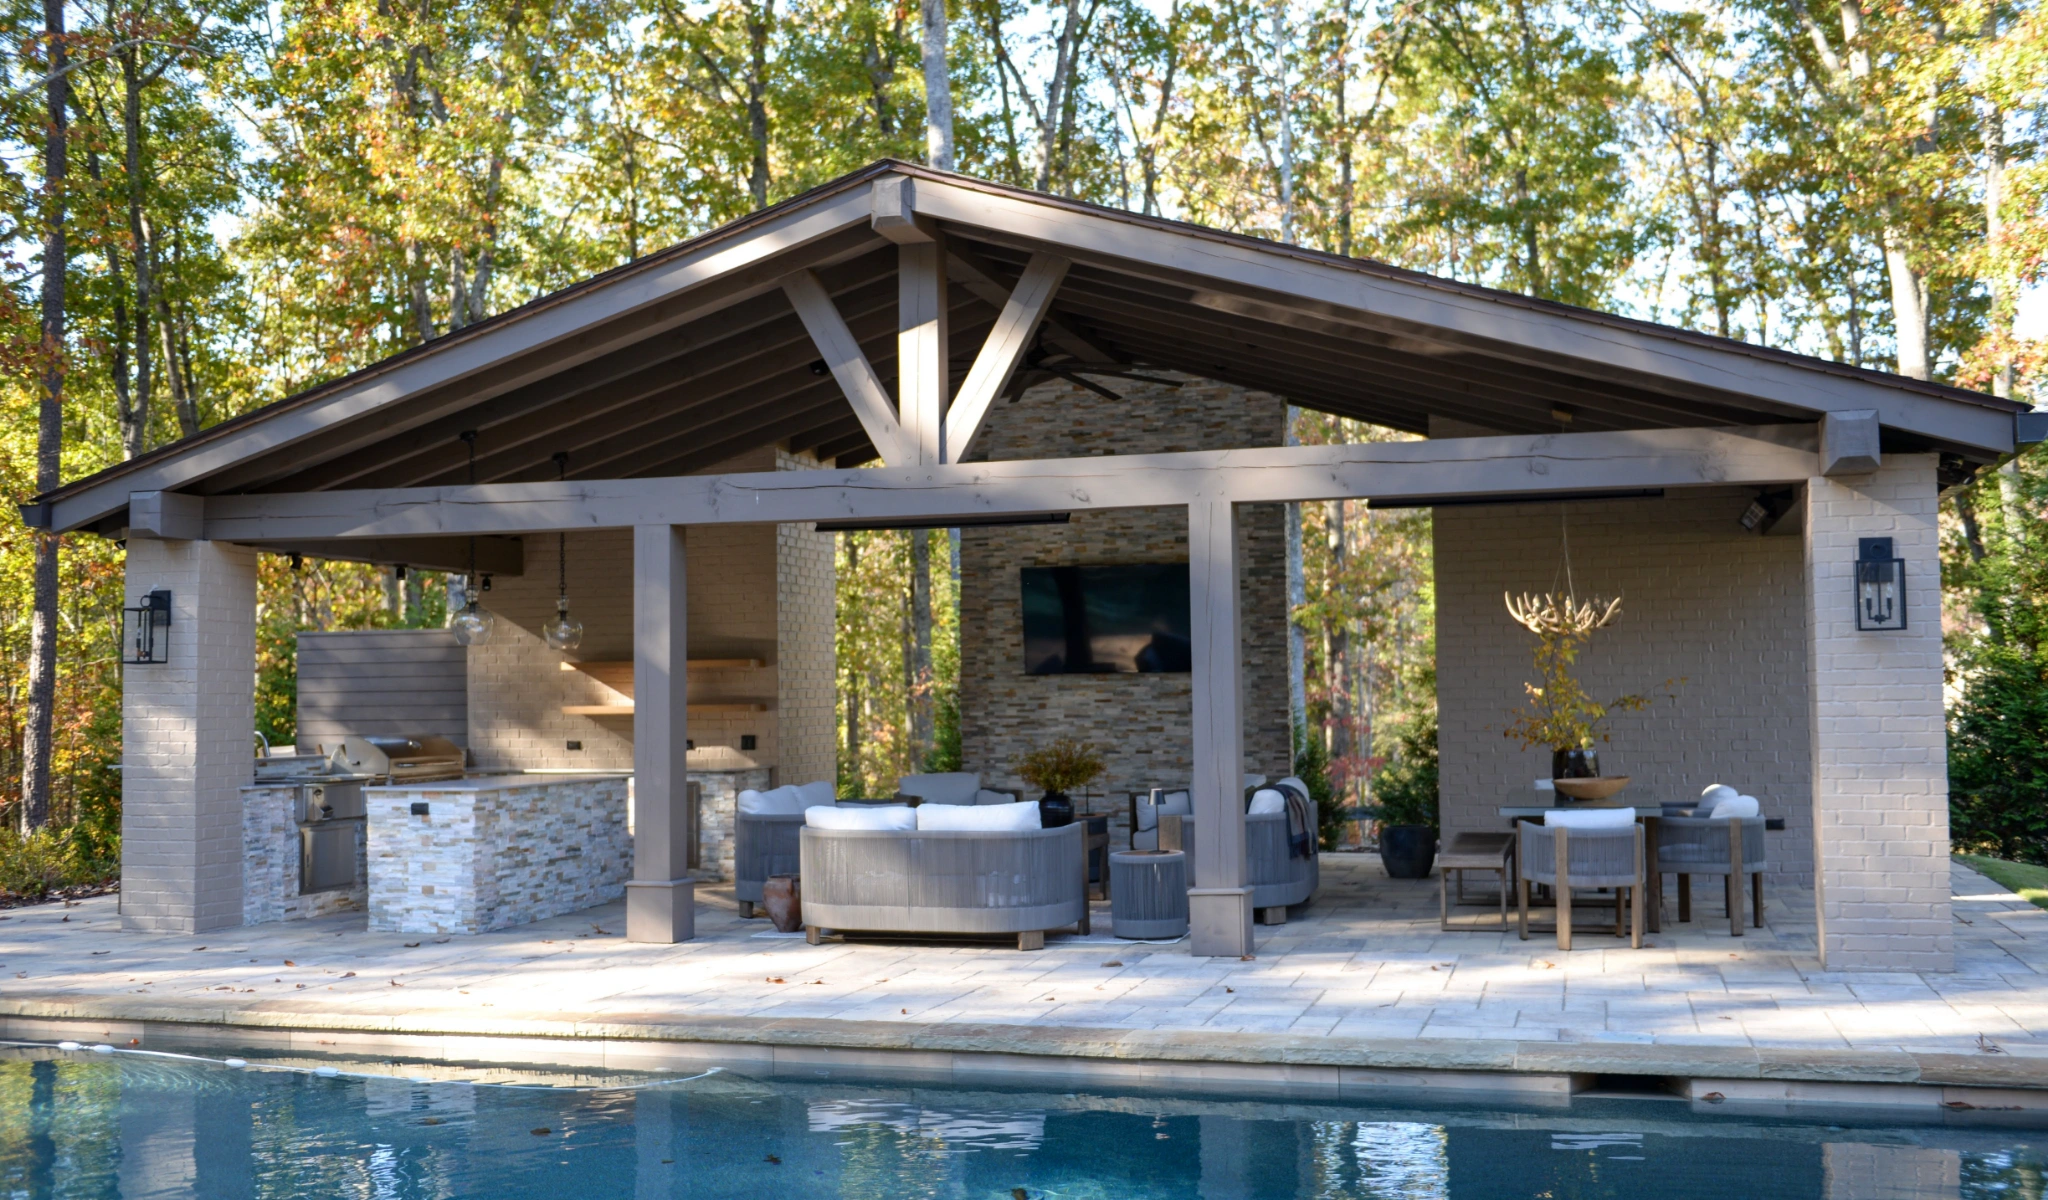 An outdoor living area featuring a pool and patio.